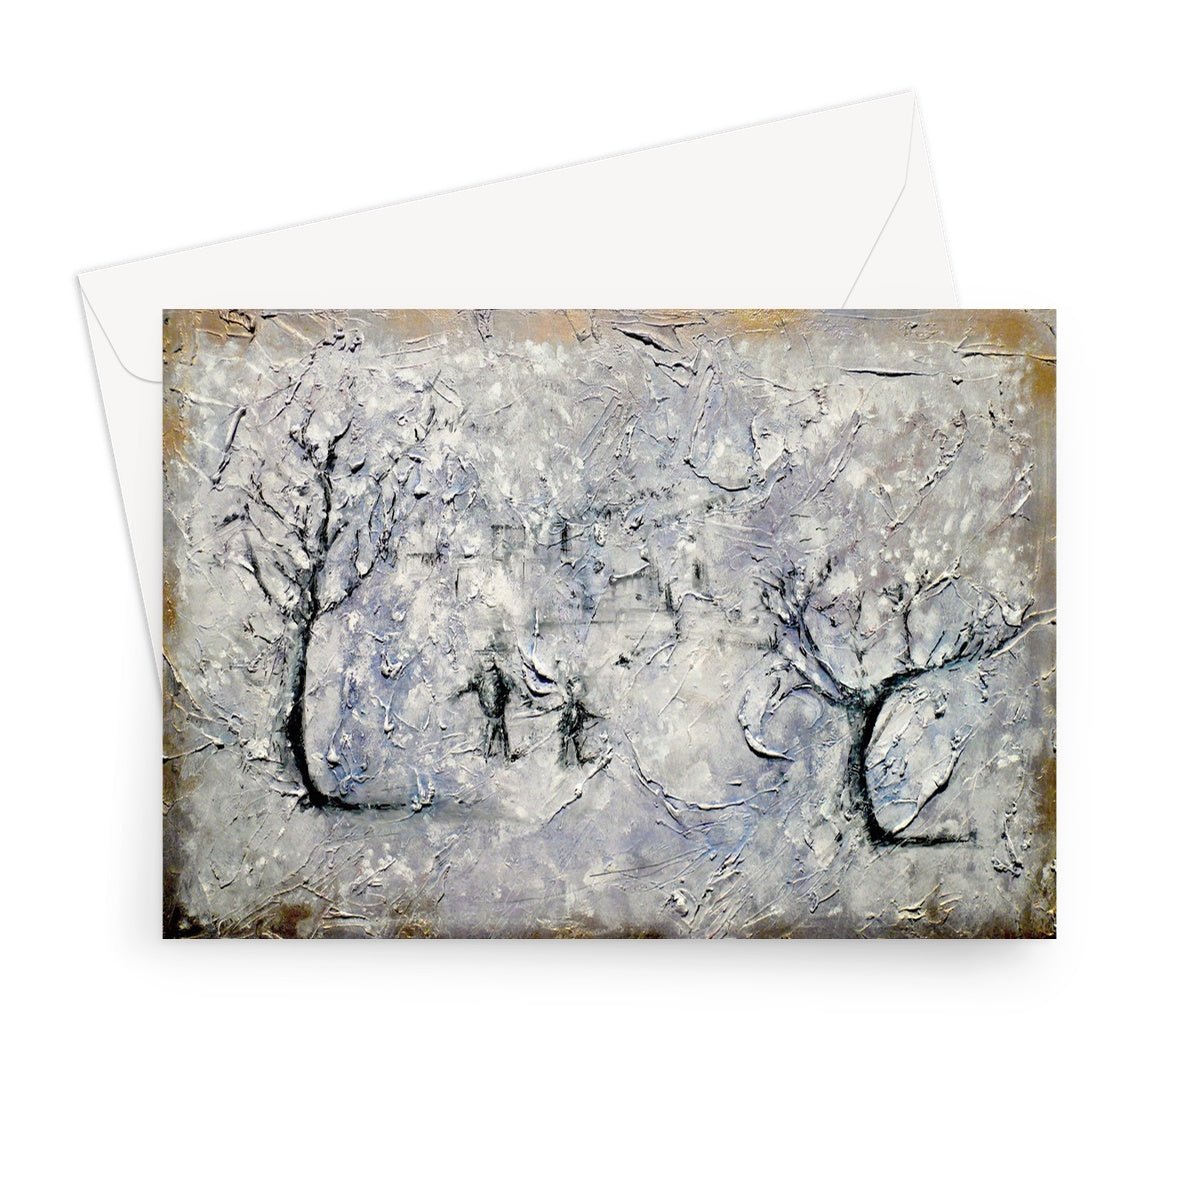 Father Daughter Snow Art Gifts Greeting Card-Greetings Cards-Abstract & Impressionistic Art Gallery-7"x5"-1 Card-Paintings, Prints, Homeware, Art Gifts From Scotland By Scottish Artist Kevin Hunter